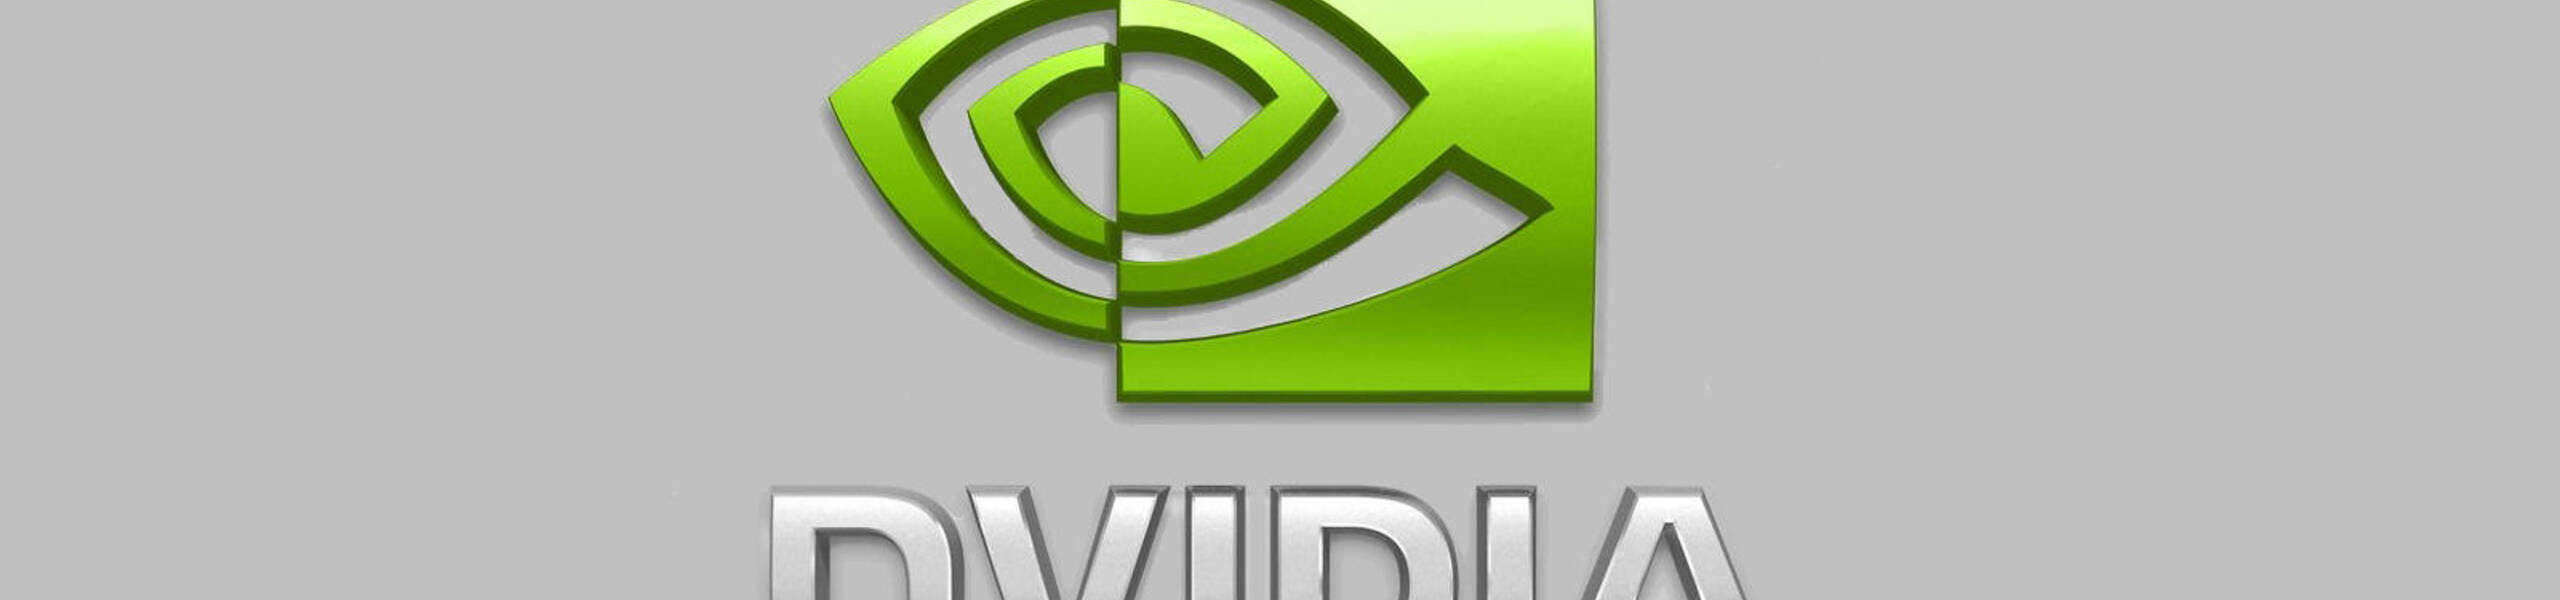 NVIDIA: hottest stock of the week